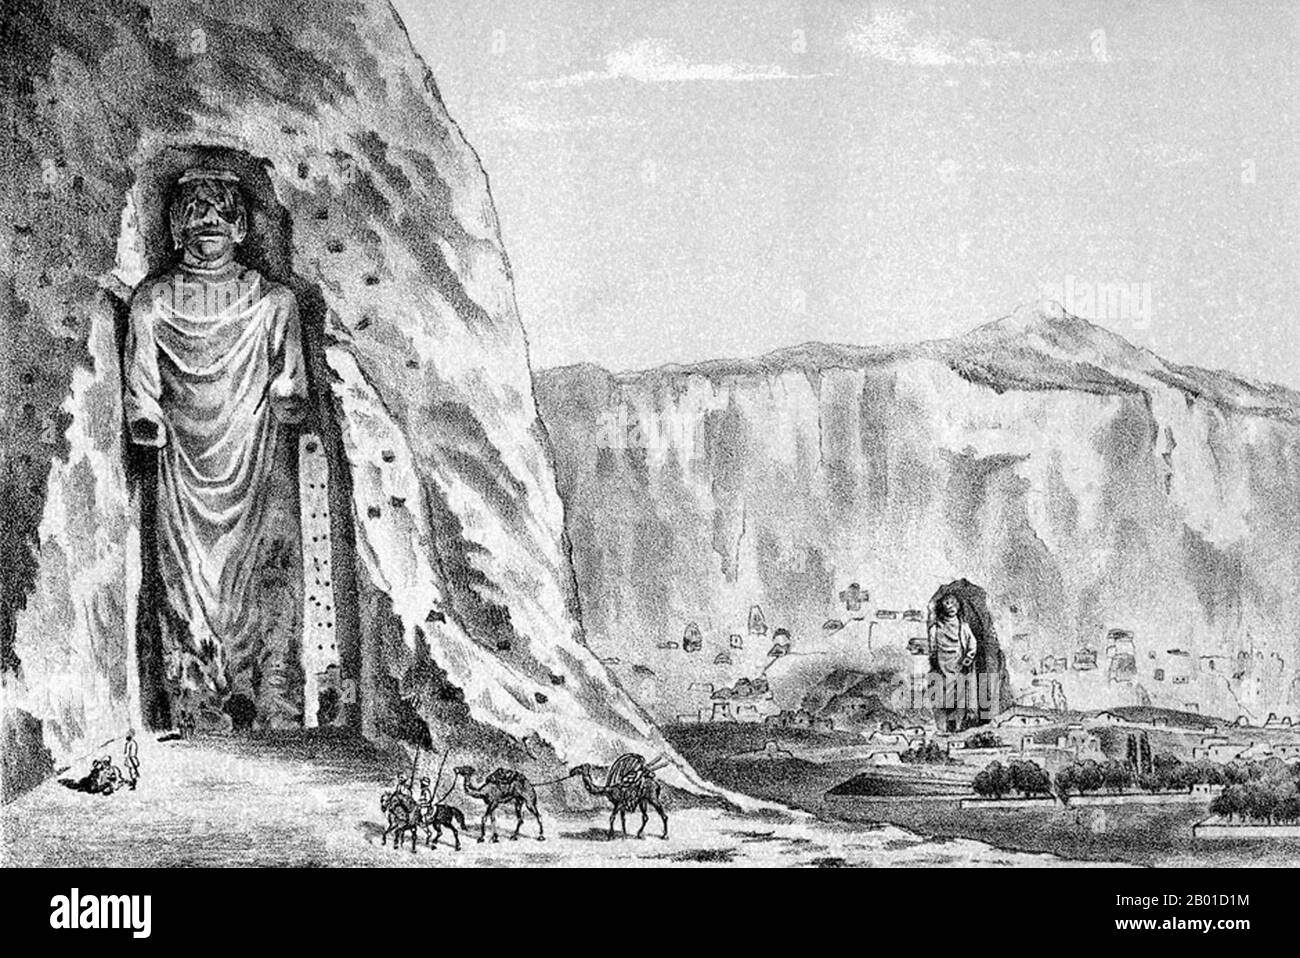 Afghanistan: The Buddhas of Bamiyan as represented by Iwan Lawrowitsch Jaworski (fl. 1870s-1880s), c. 1885.  The Buddhas of Bamiyan were two 6th century monumental statues of standing Buddhas carved into the side of a cliff in the Bamiyan valley in the Hazarajat region of central Afghanistan.  Built in 507 CE, the larger in 554 CE, the statues represented the classic blended style of Gandhara art. The bodies were hewn directly from the sandstone cliffs, but details were modeled in mud mixed with straw.  They were intentionally dynamited and destroyed in 2001 by the Taliban, declared as 'idols' Stock Photo